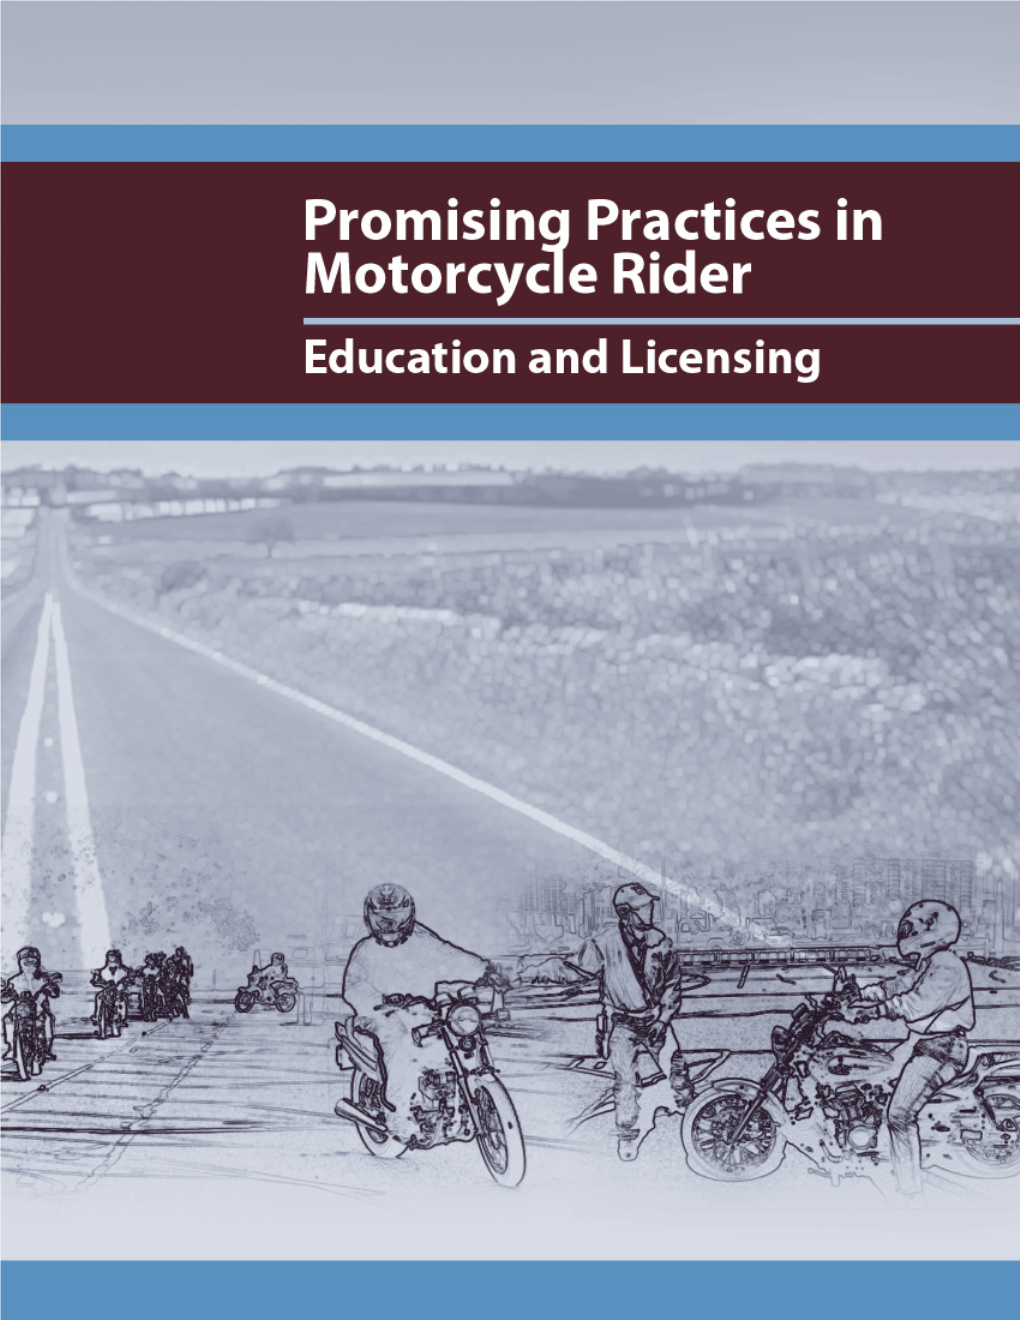 Promising Practices in Motorcycle Rider Education and Licensing